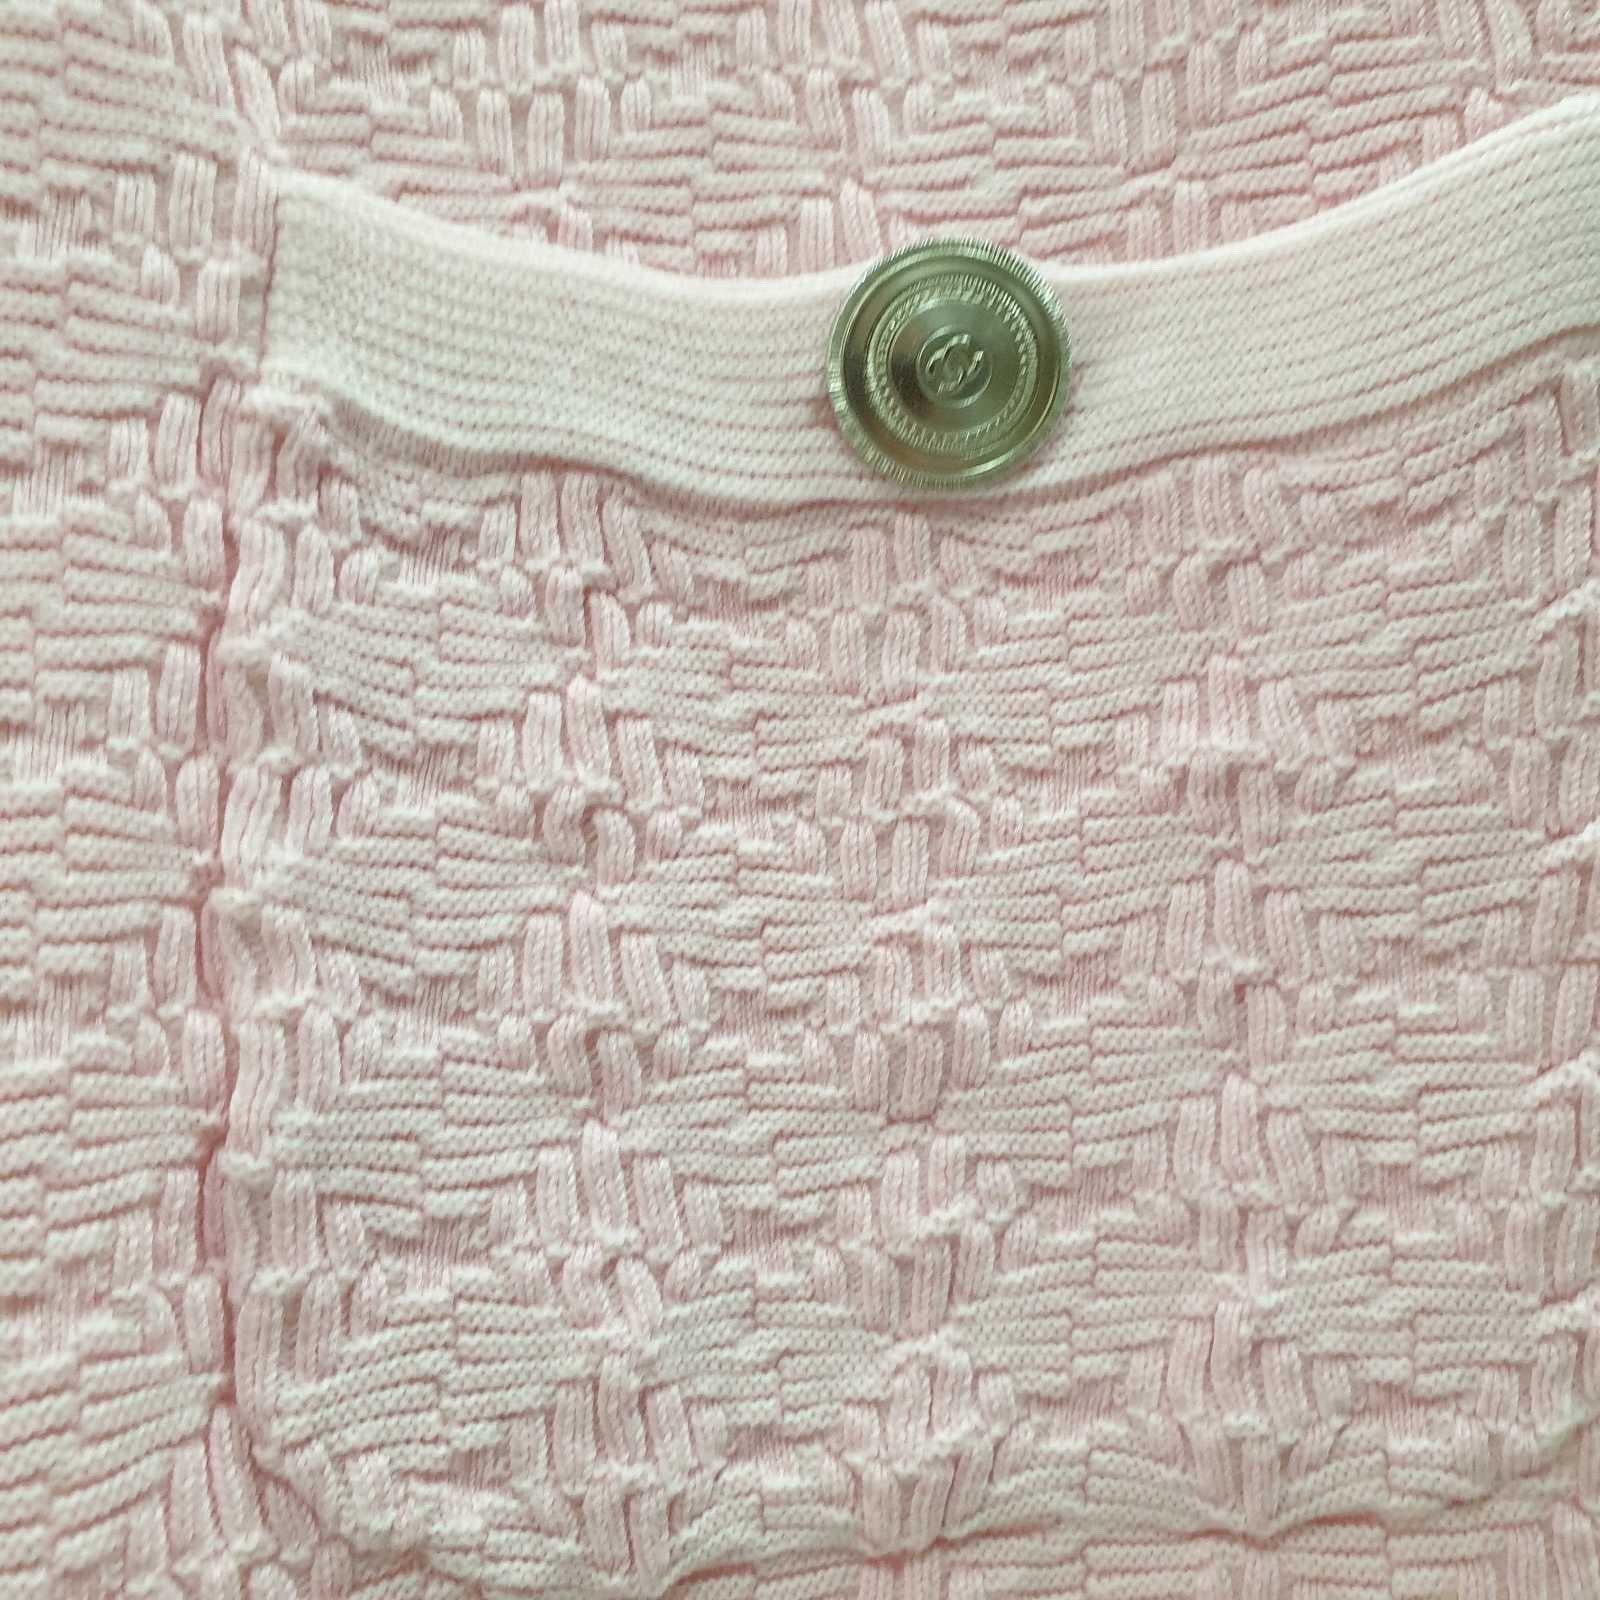 CHANEL 2014 Pink Cotton Dress Cardigan Suit Set In Good Condition For Sale In Krakow, PL